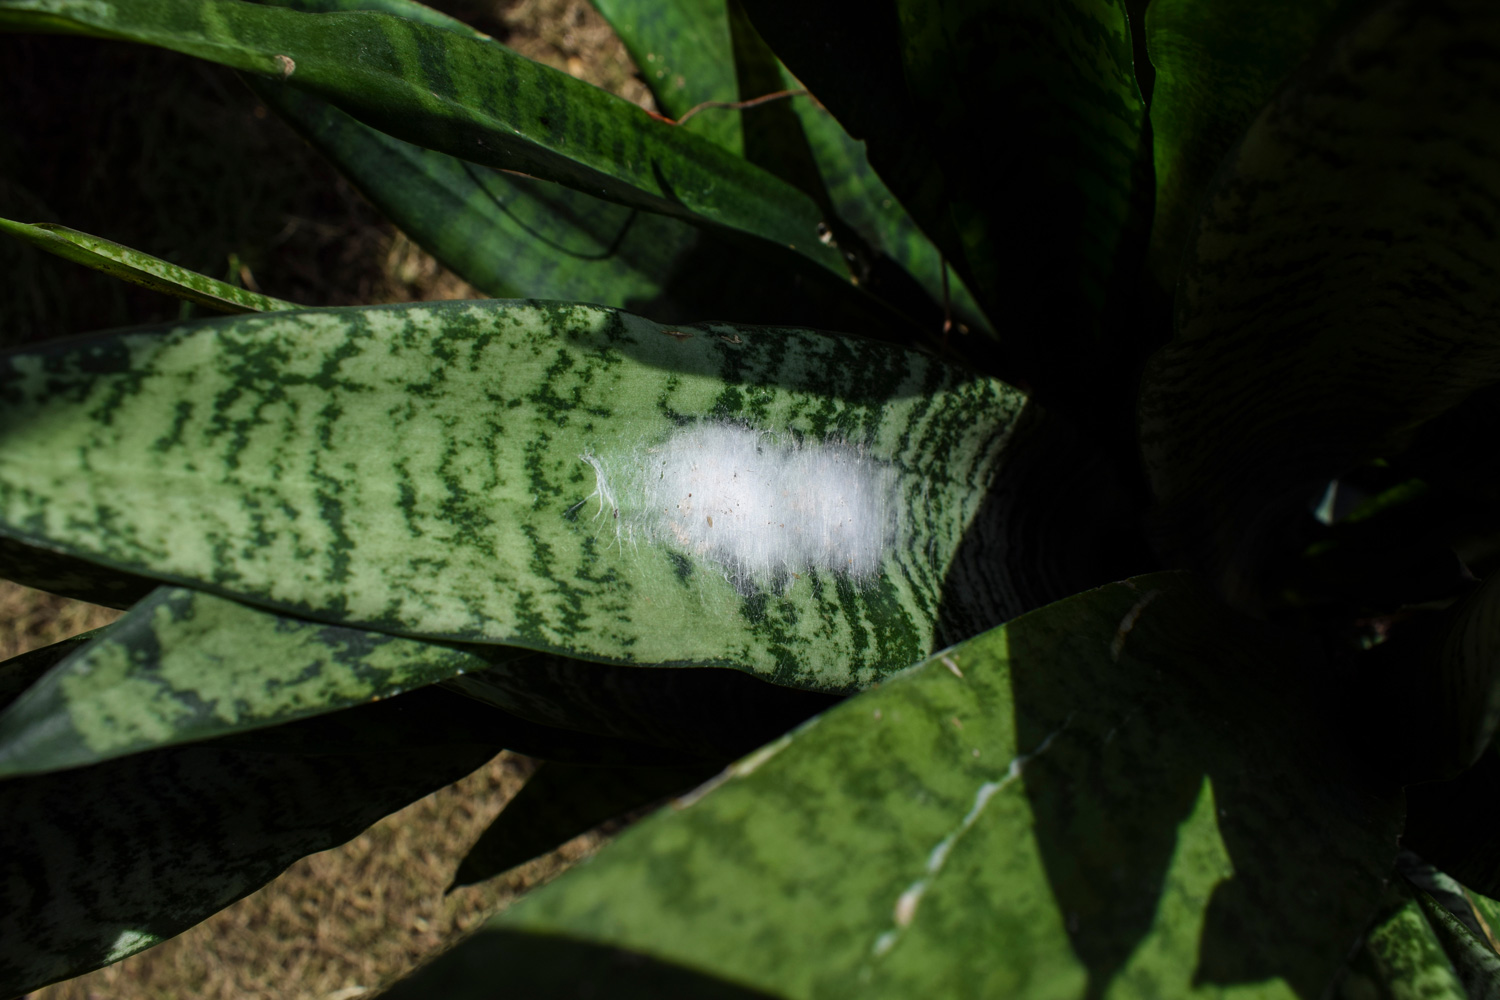 White fuzzy cobweb type of mold like thing growth on leaf of a Snake plant leaf. Fungus disease damage on leaves